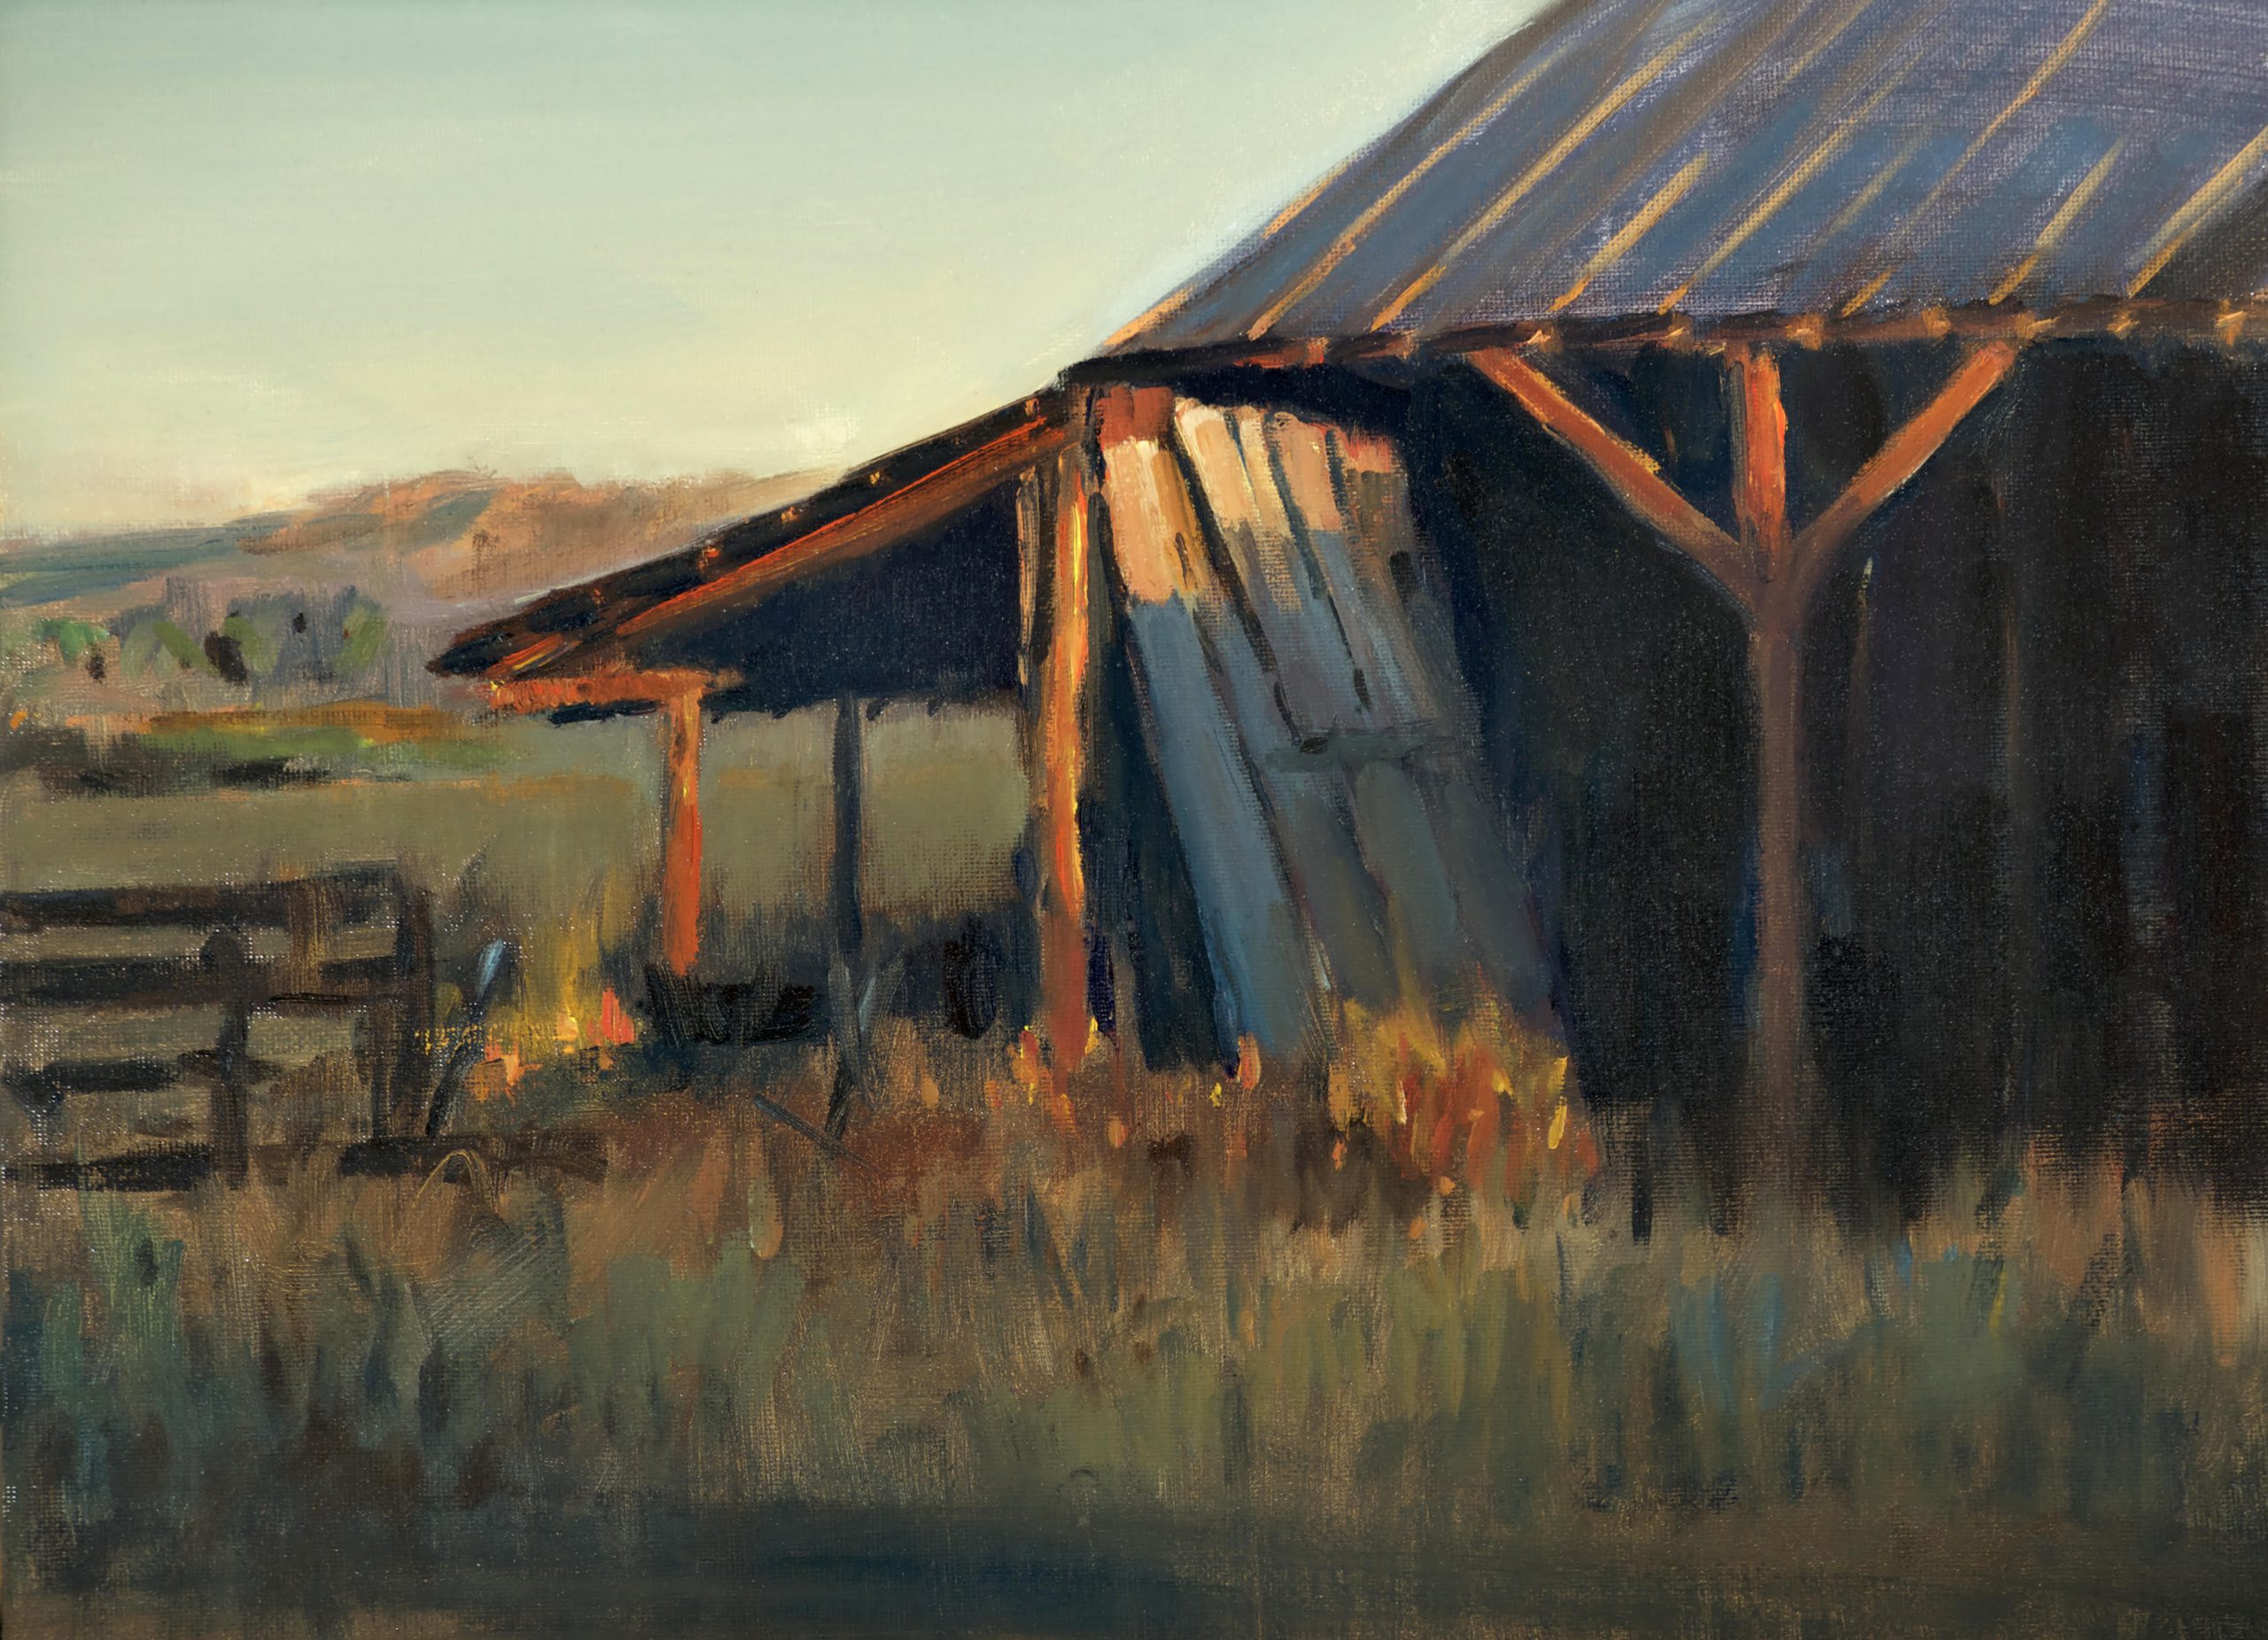 Peter Campbell - The Neighbor's Barn